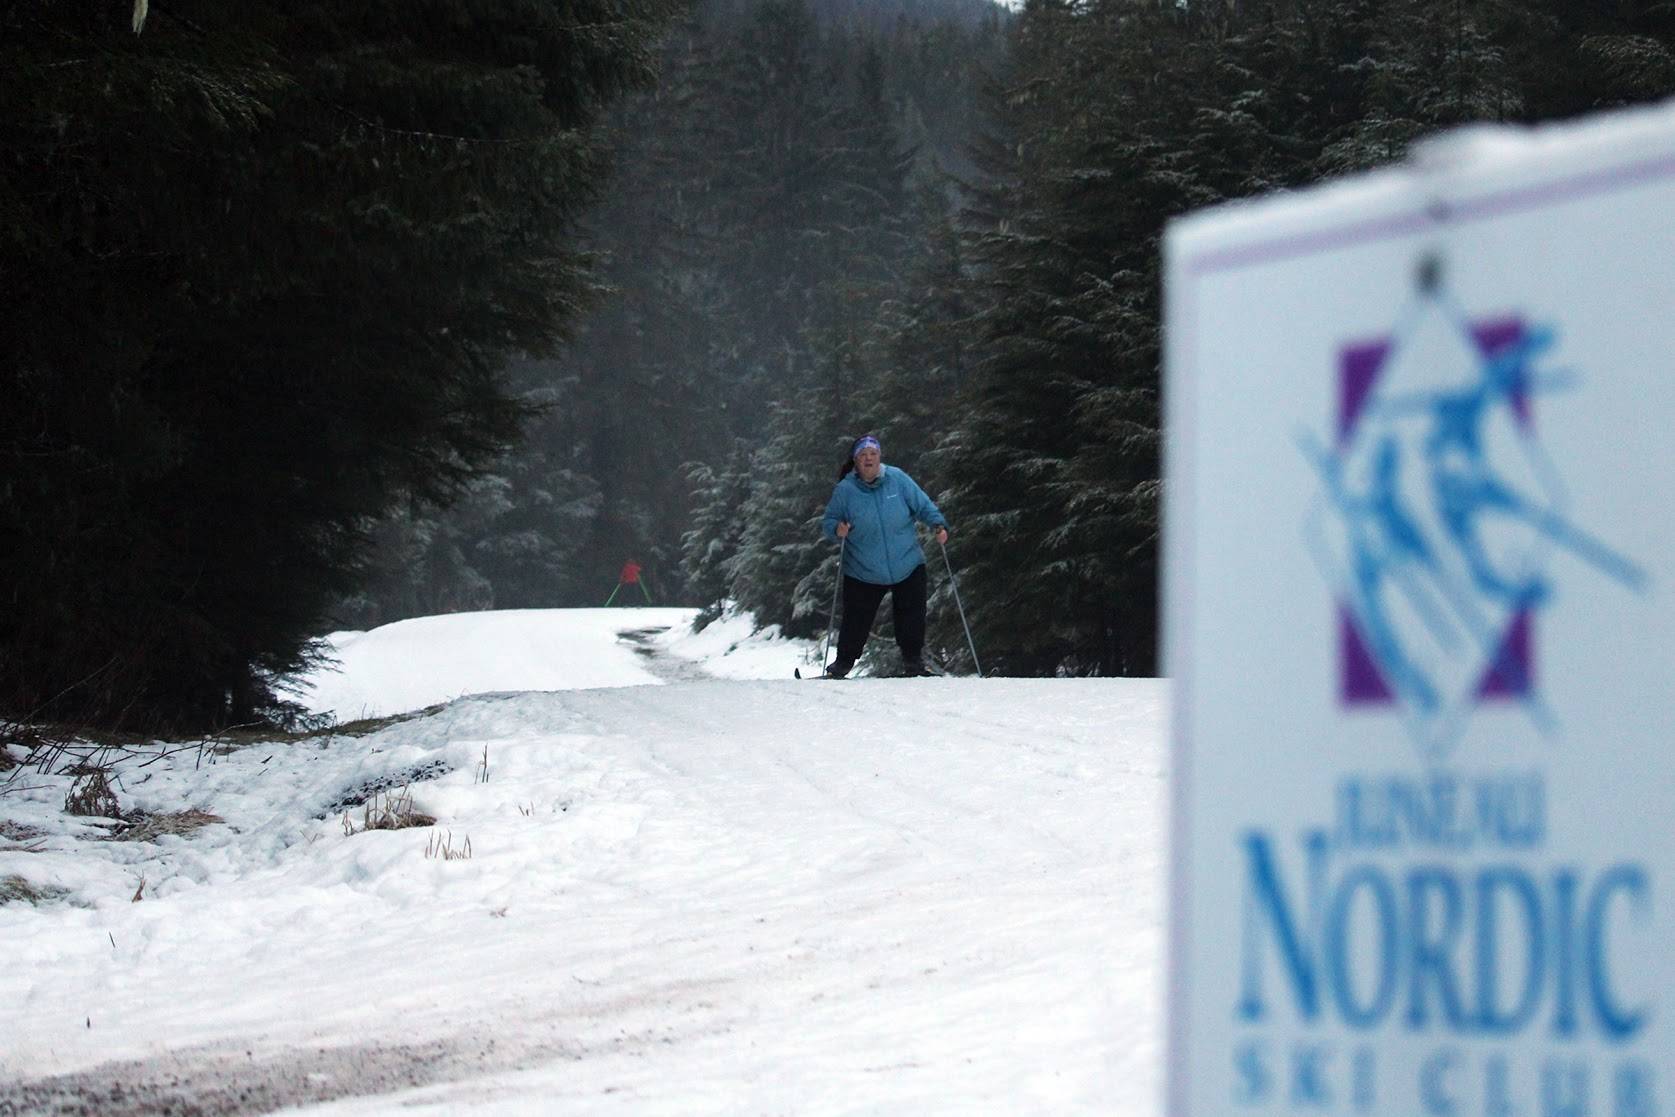 Allison Smith, a member of the Juneau Nordic Ski Club, passes another skier on her way along Montana Creek Road. Ski trails around Juneau will soon be hiding clues for Juneau Nordic Ski Club’s ski-o’cache event. (Ben Hohenstatt/Juneau Empire)